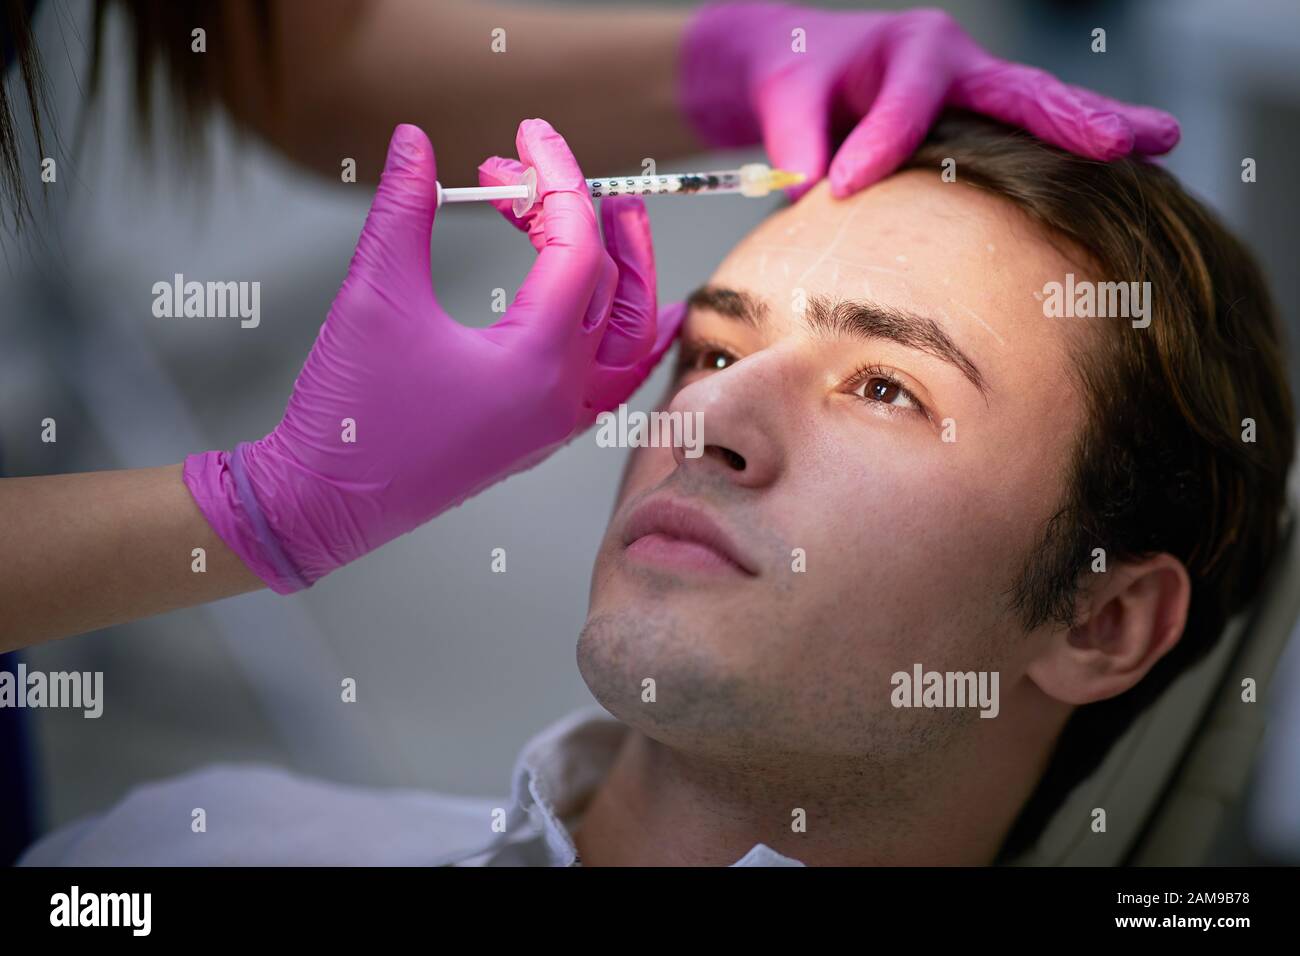 Young man having his forehead wrinkles reduced with inserted muscle movement inhibitor substance Stock Photo